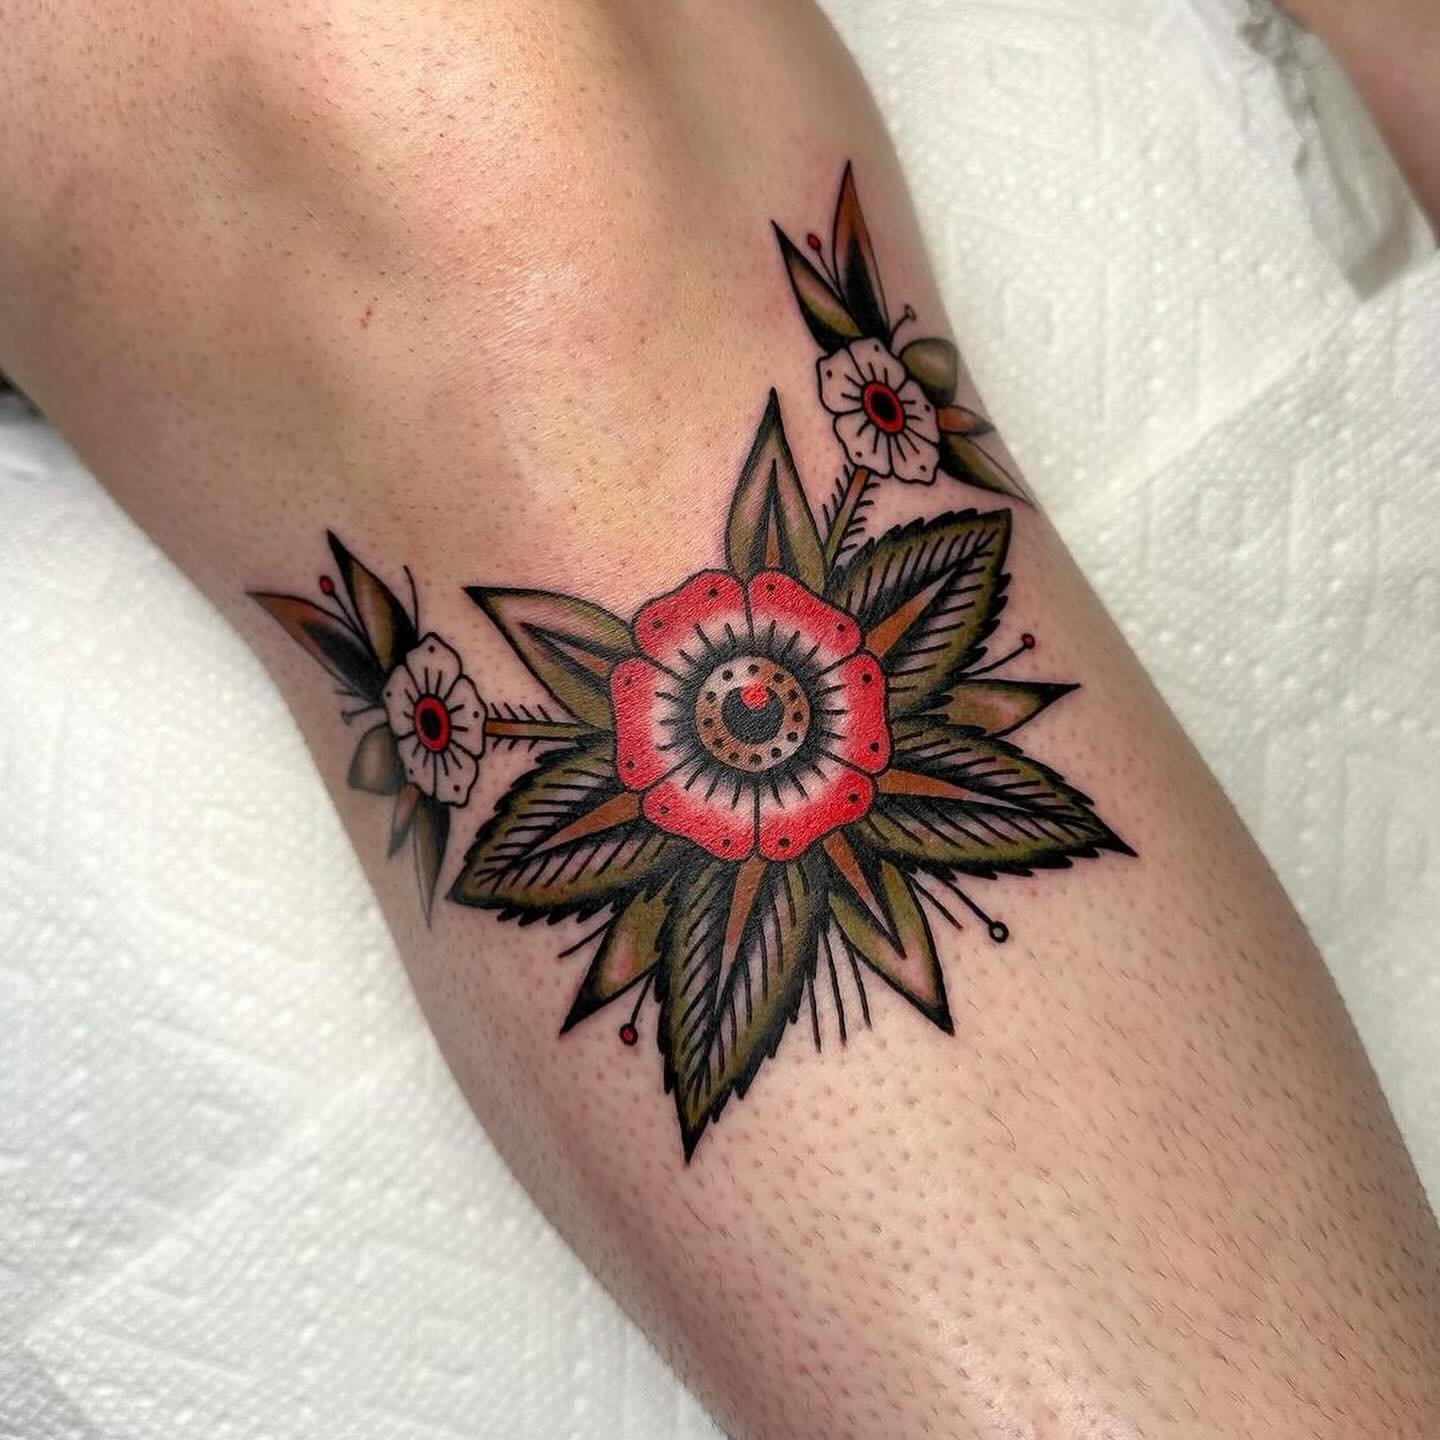 lil knee frame

made by: @carbellatattoo - To book with Carissa, fill out the form linked in her bio! 😎

#kneeadornments #floraltattoo #aroundthekneein80days